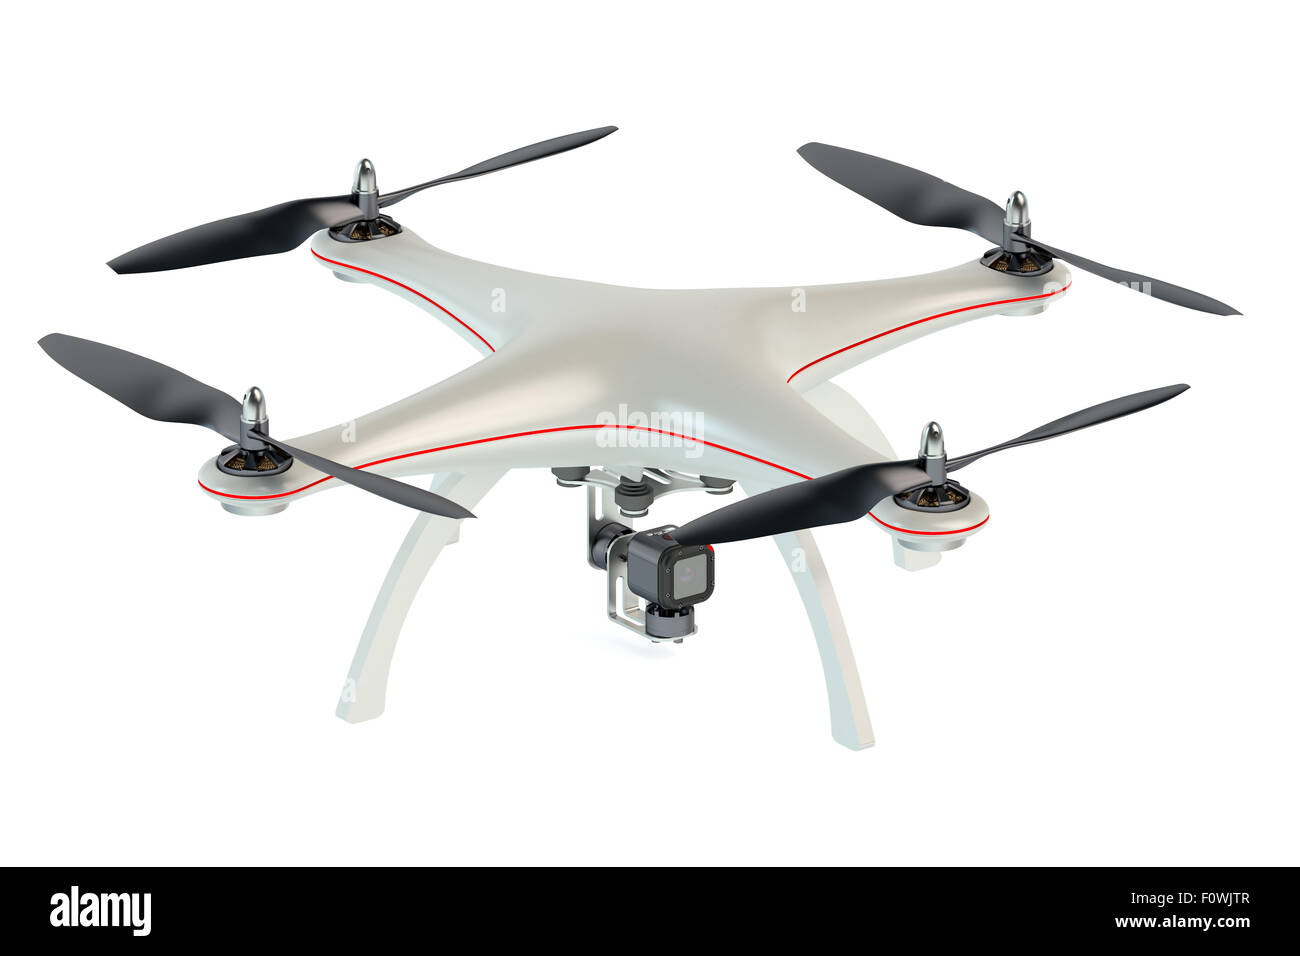 Drone quadrocopter isolated on white background Stock Photo